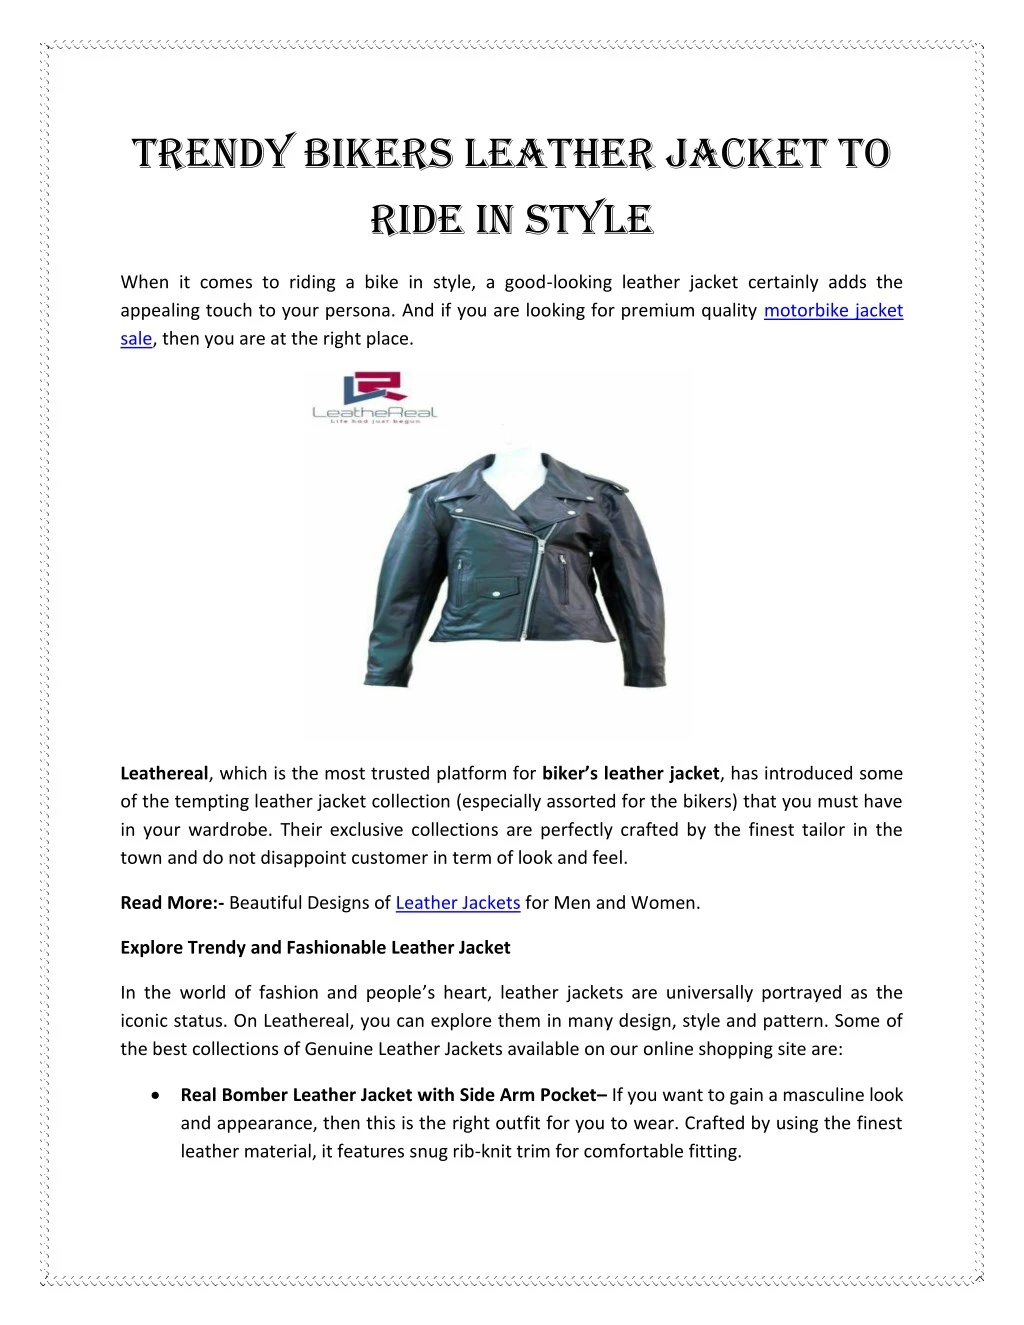 trendy bikers leather jacket to ride in style